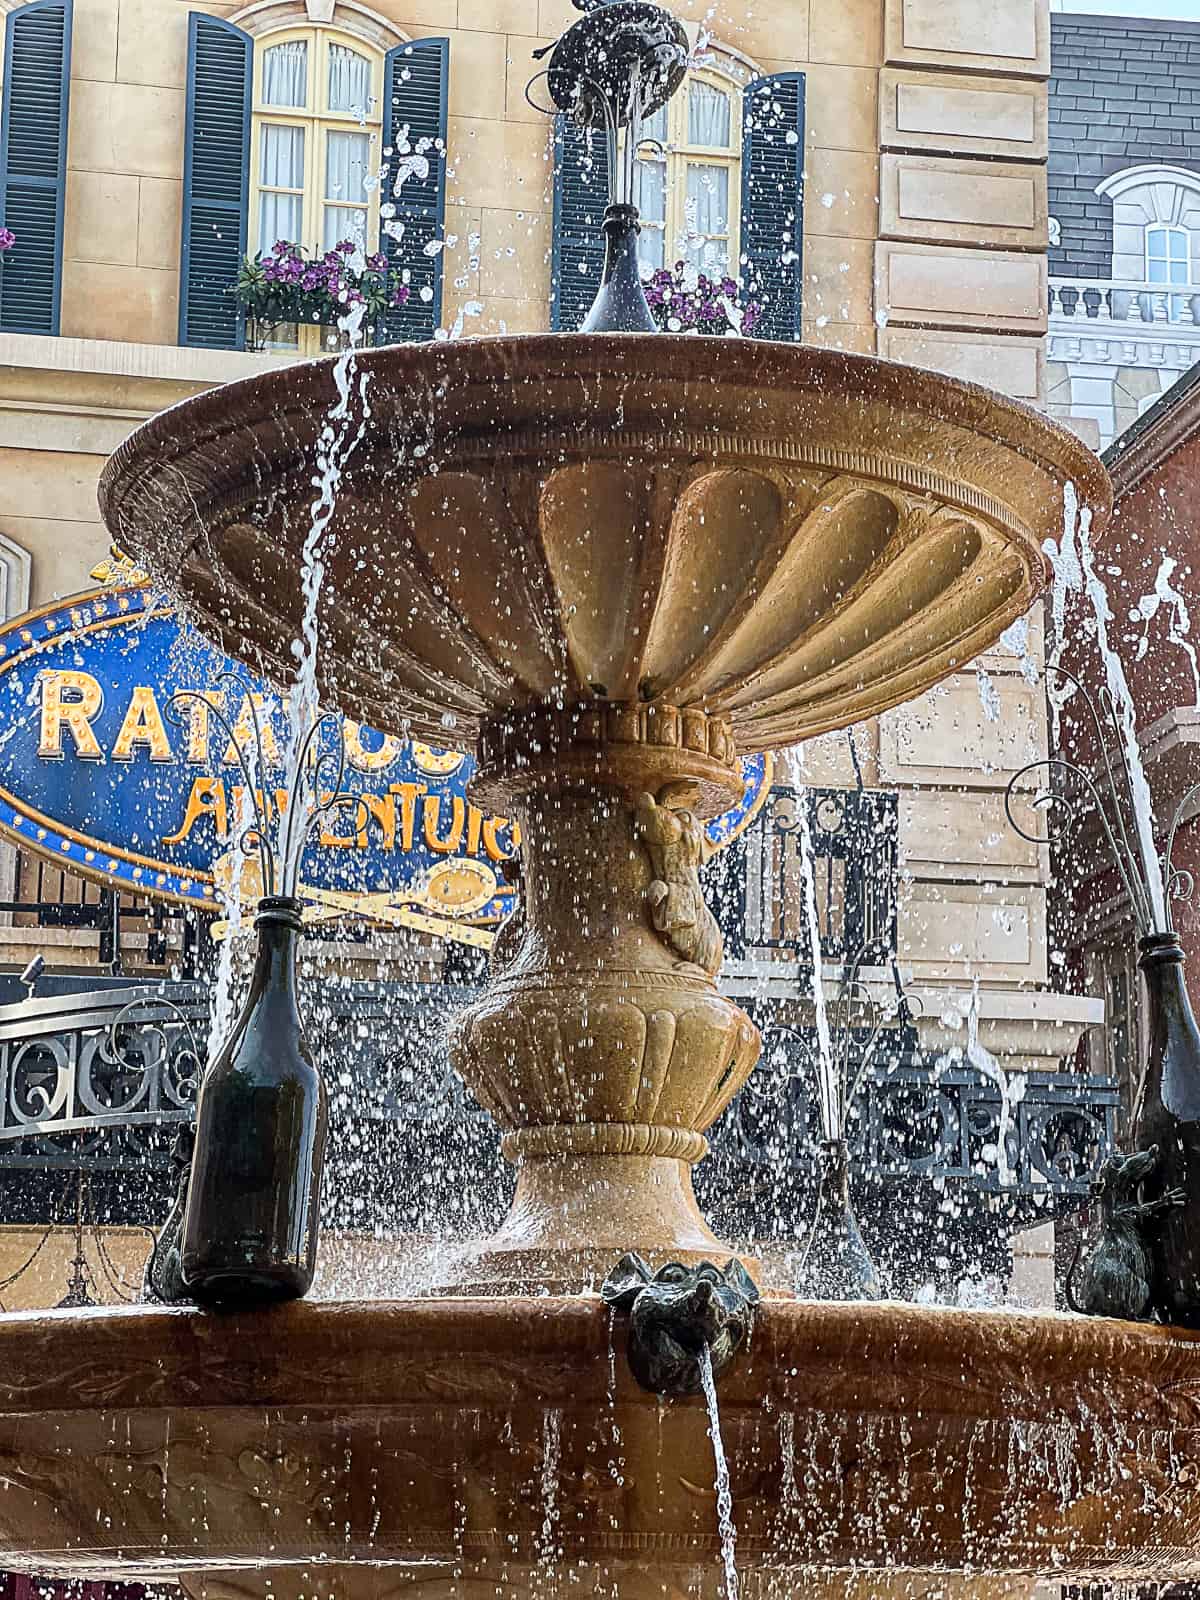 Remys water fountain in France Pavilion in Epcot Park